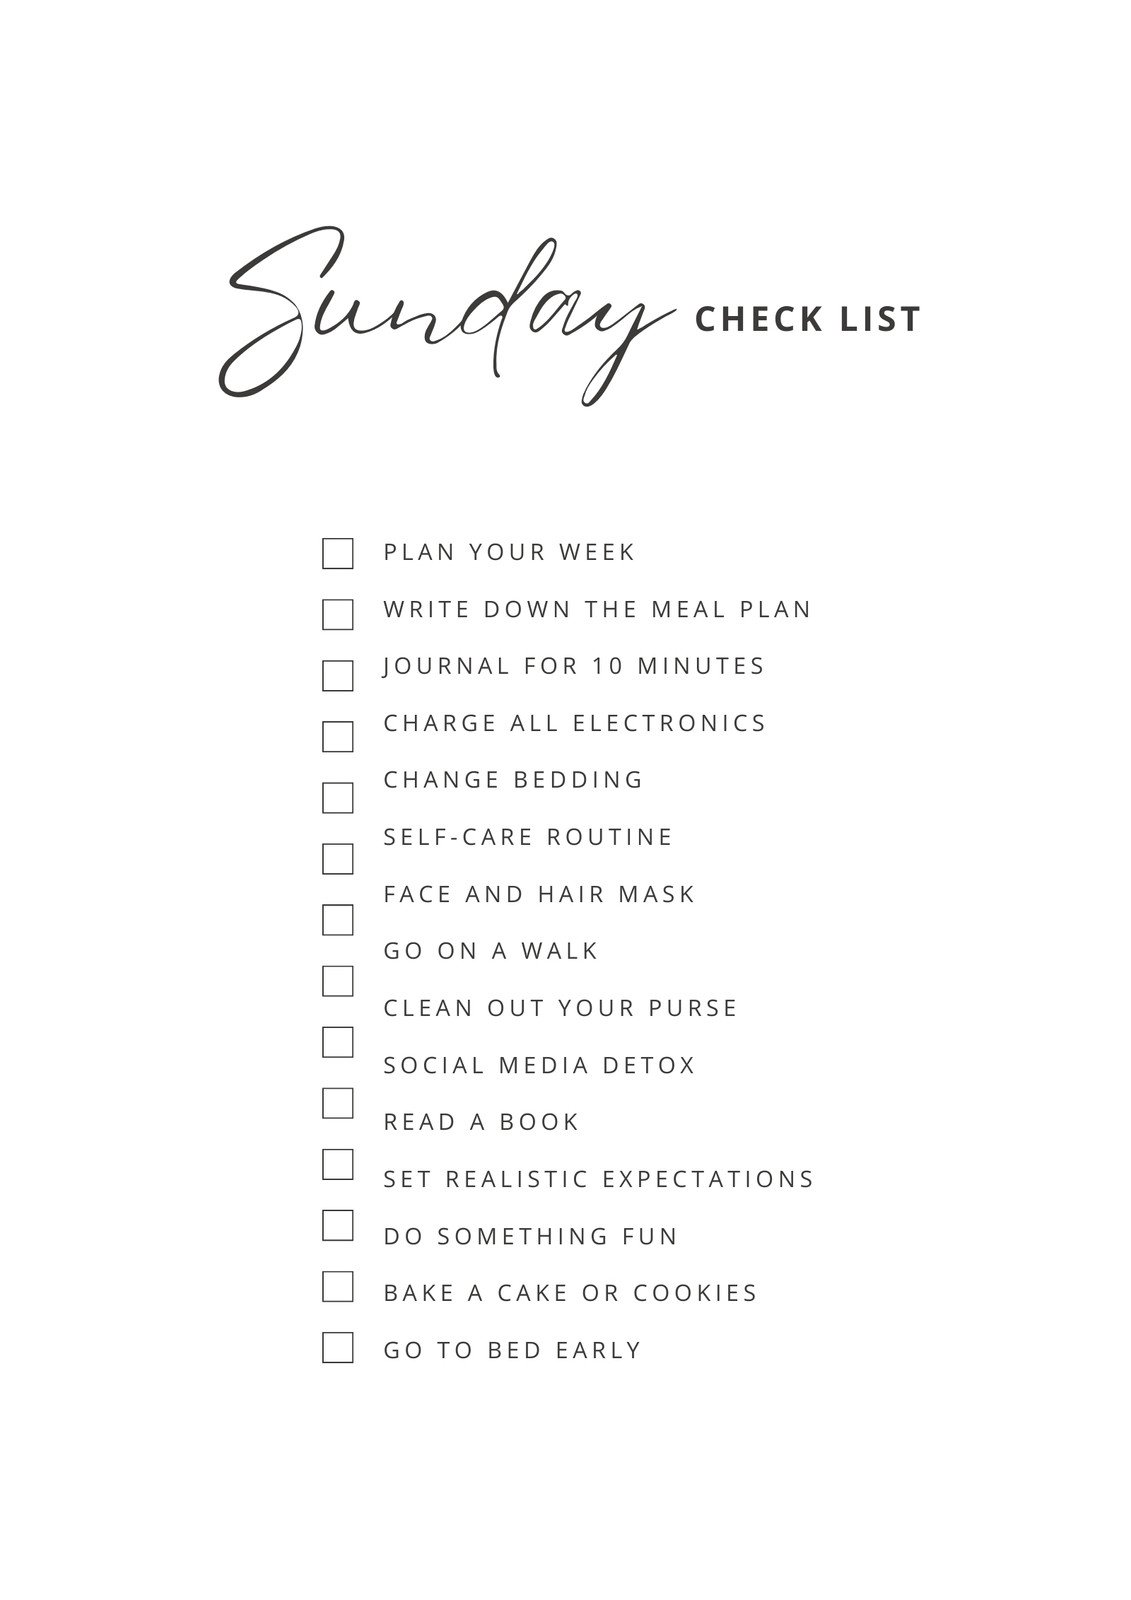 Printable: Travel Packing Checklist Balck and white / Brown and